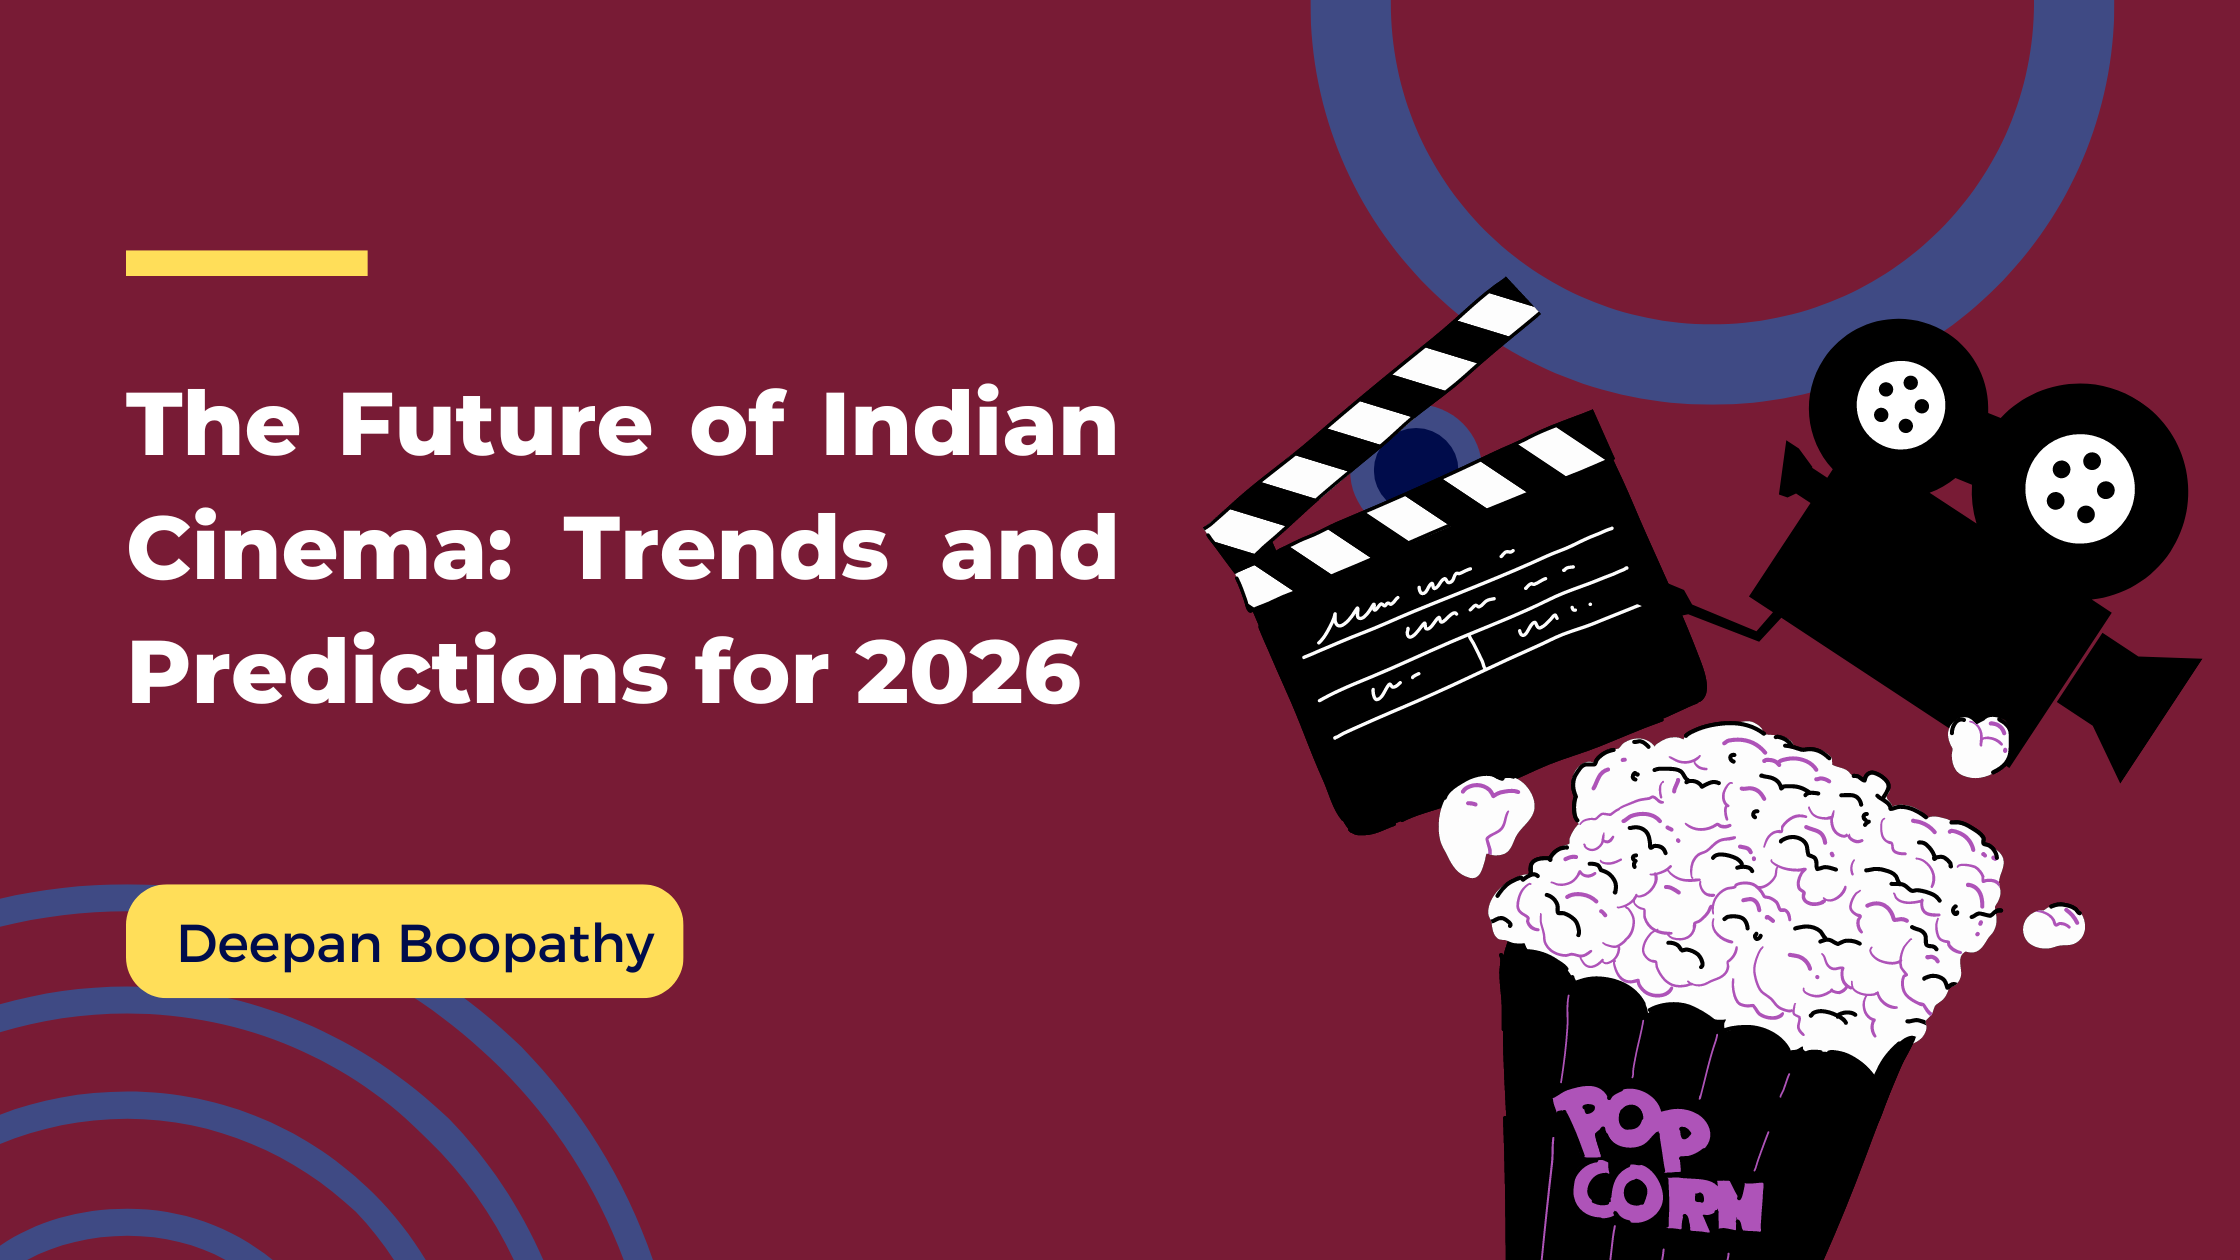 The Future of Indian Cinema: Trends and Predictions for 2026 | Deepan Boopathy